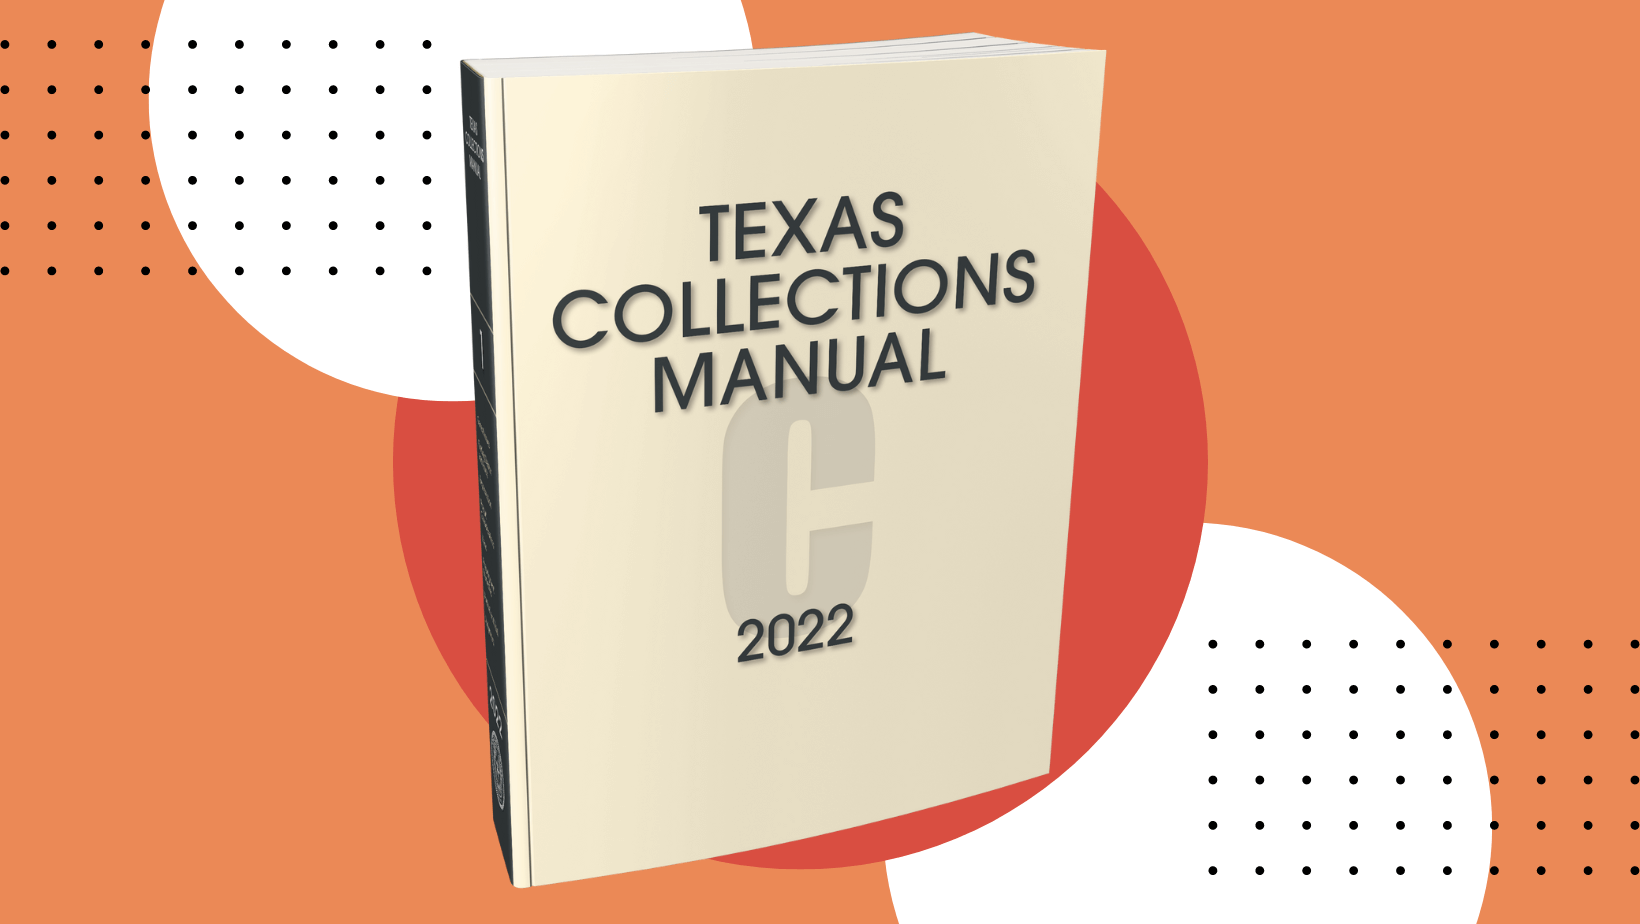 Texas Collections Manual